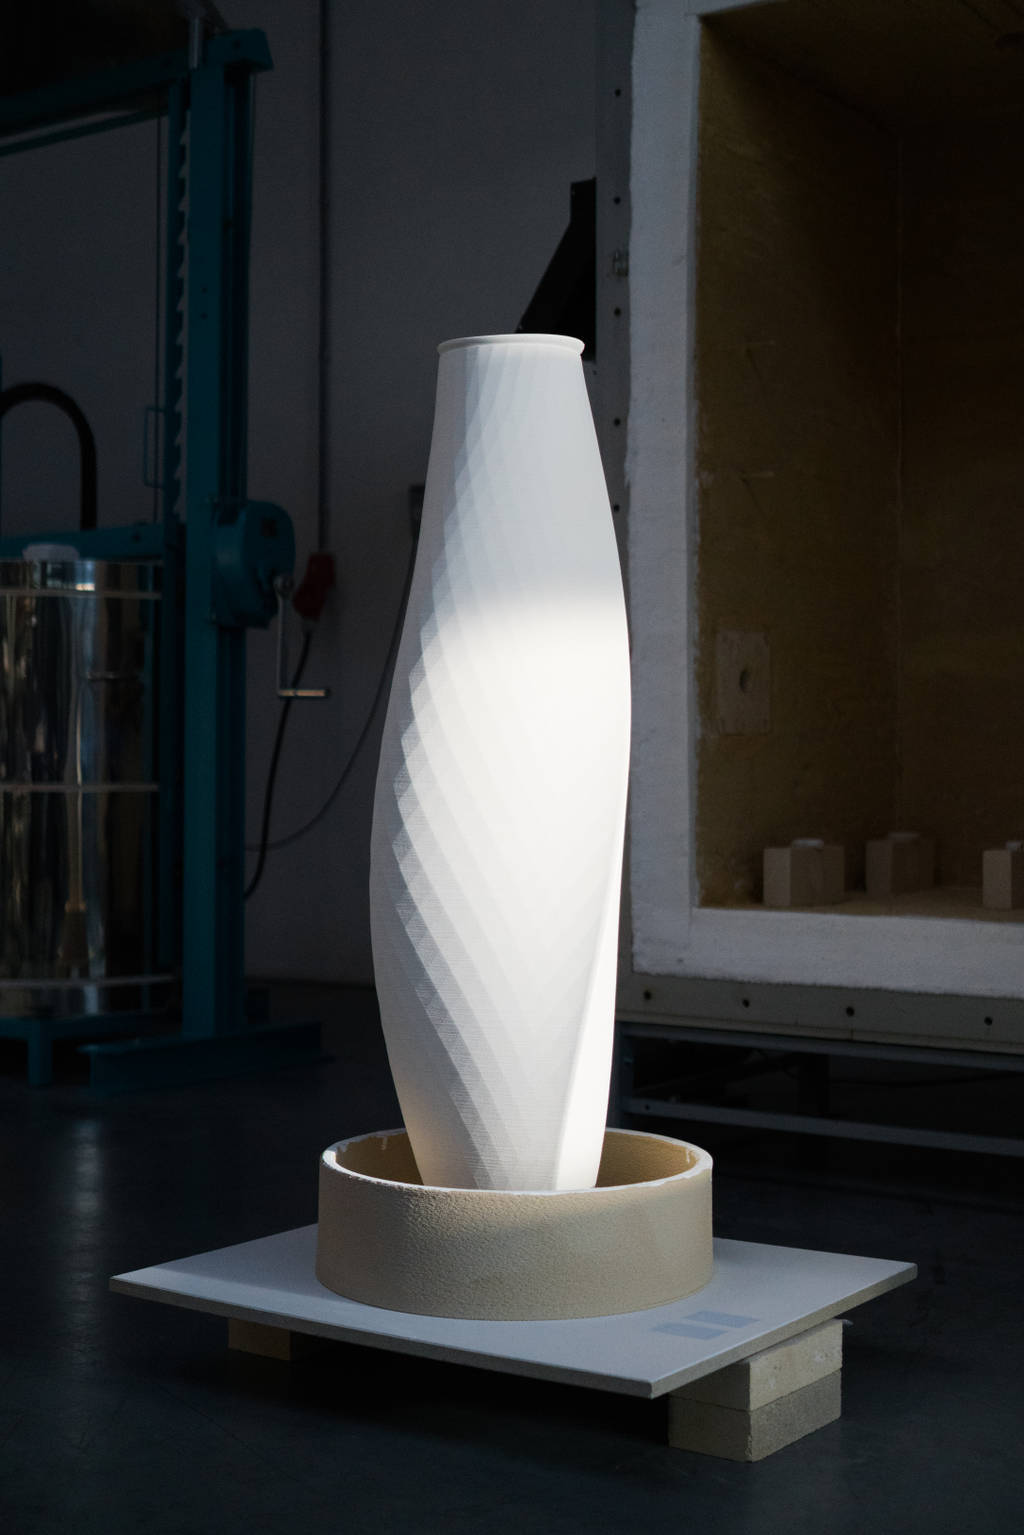 Unveiling flawless fired porcelain inside saggars after single-firing process